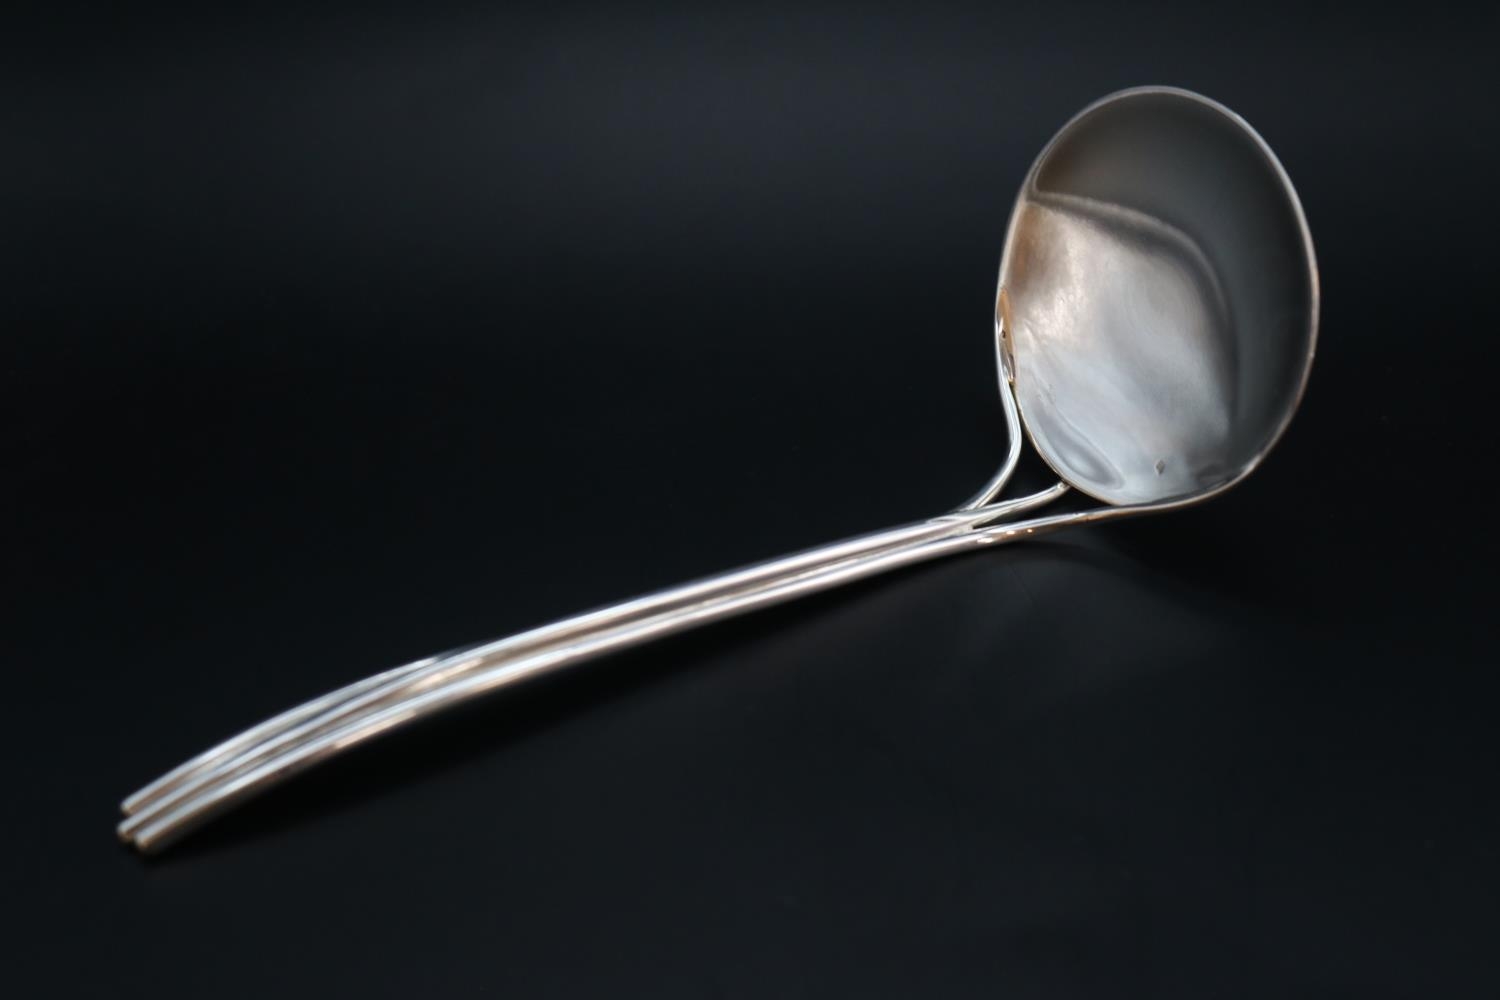 Cartier of Paris. Les Must de Cartier Paris Silver tasting Spoon with reeded handle 51g in weight in - Image 3 of 4